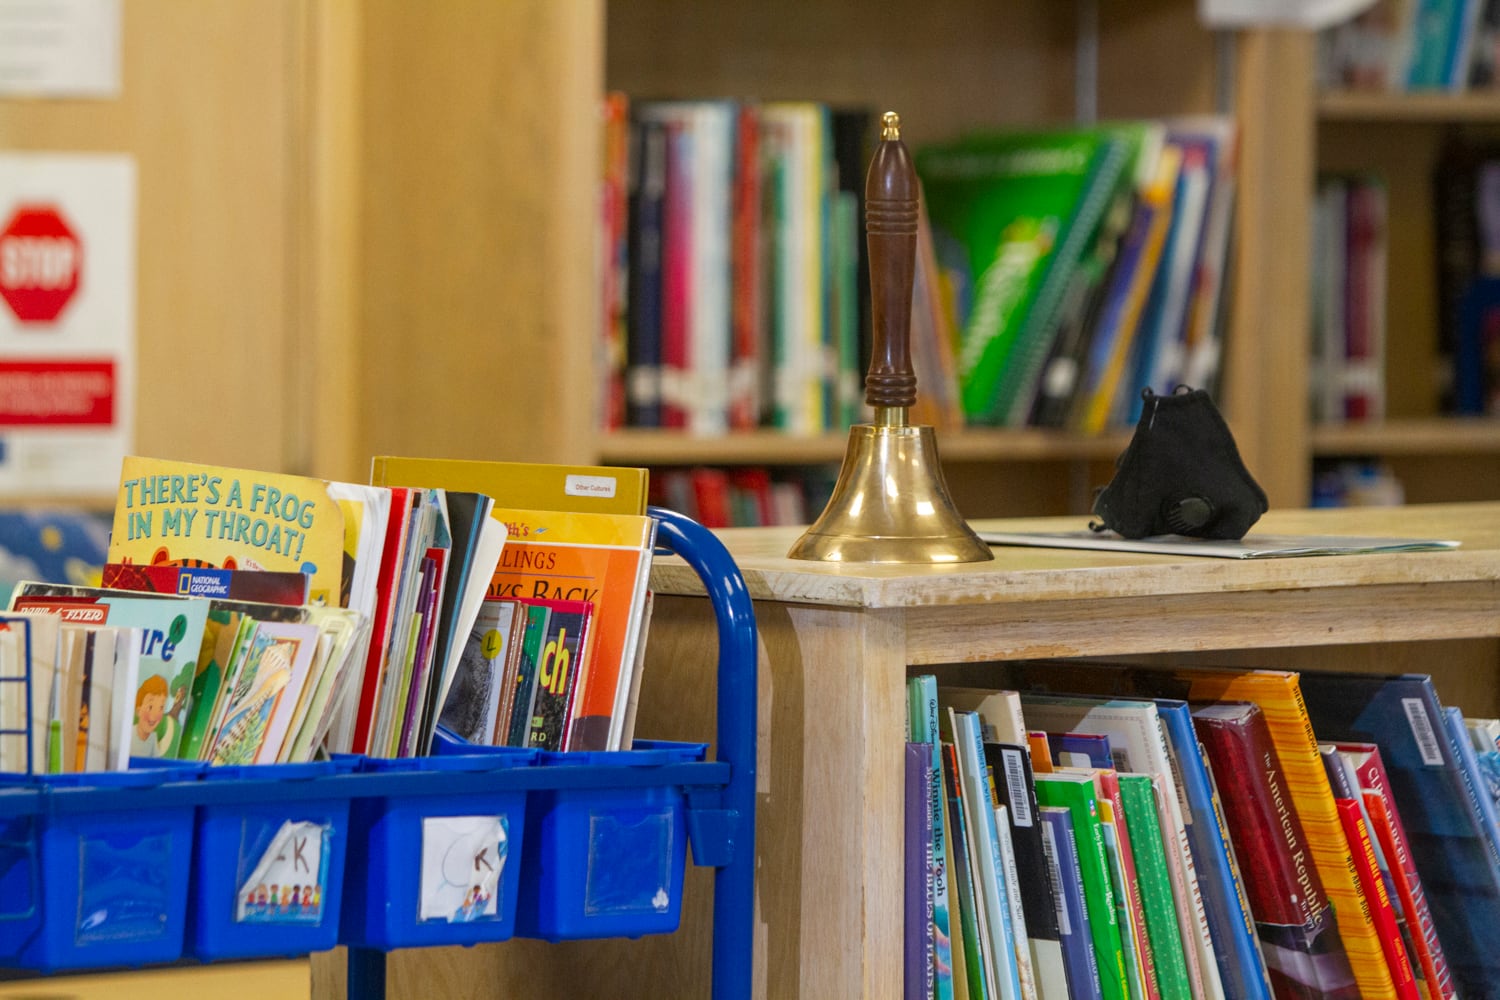 A blue book cart with children’s books sits next to full bookshelf with a bell and mask set on top.